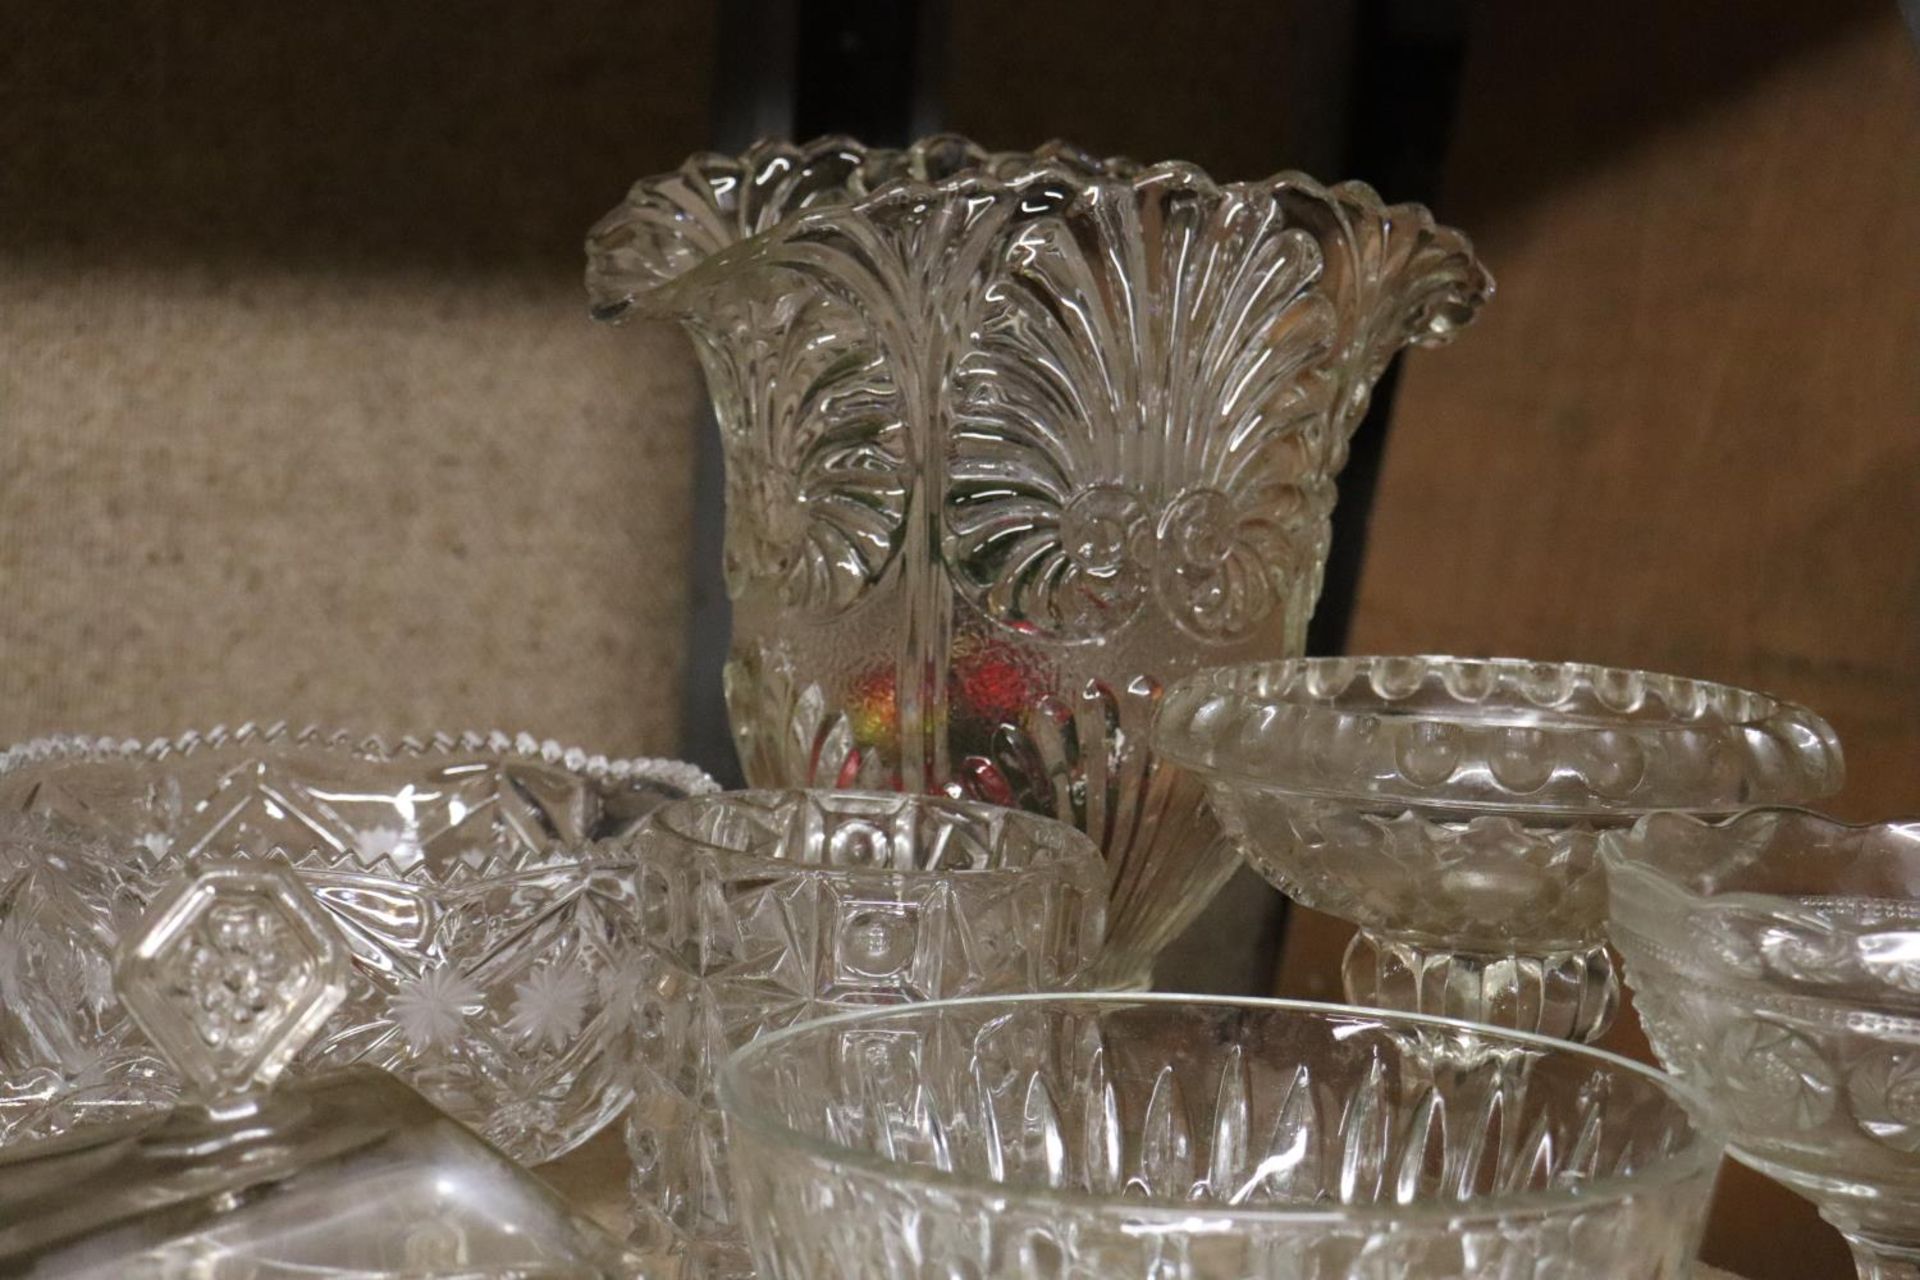 A QUANTITY OF GLASSWARE TO INCLUDE A LARGE VASE, BOWLS, FOOTED BOWLS, A CHEESE DISH, ETC - Image 3 of 5